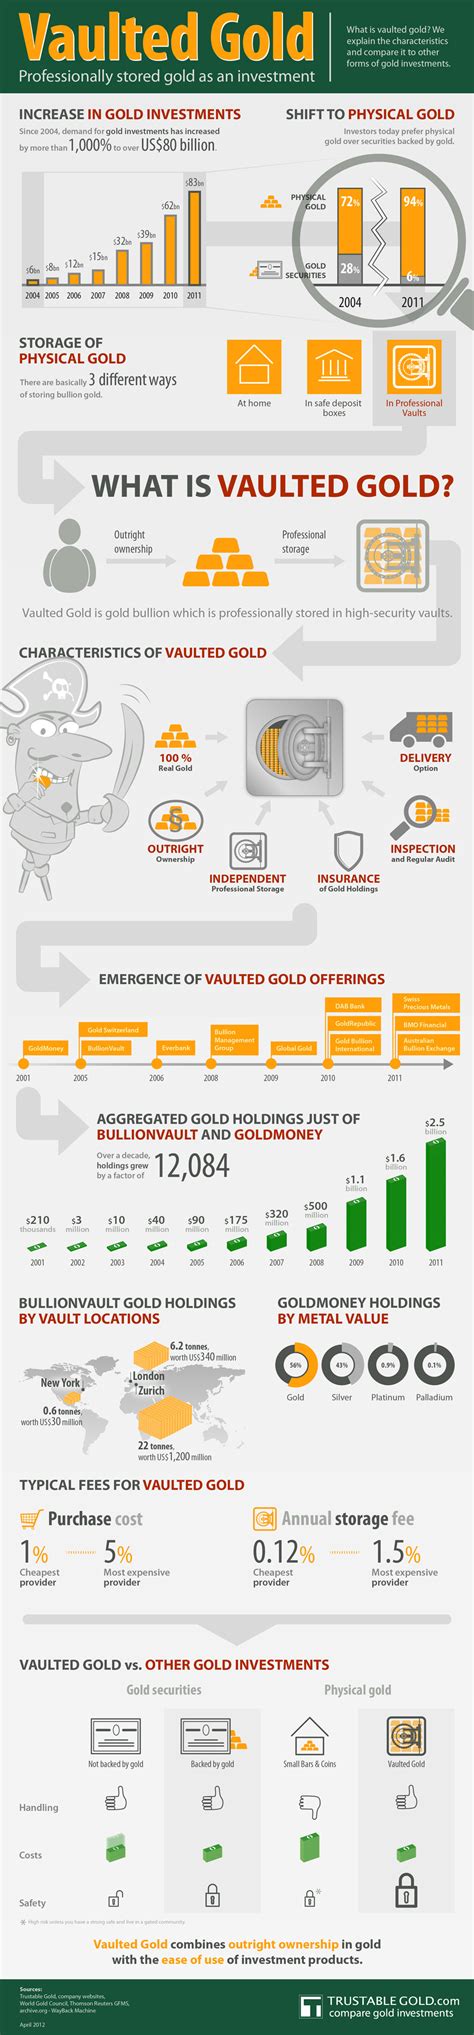 Infographic Vaulted Gold Business Insider